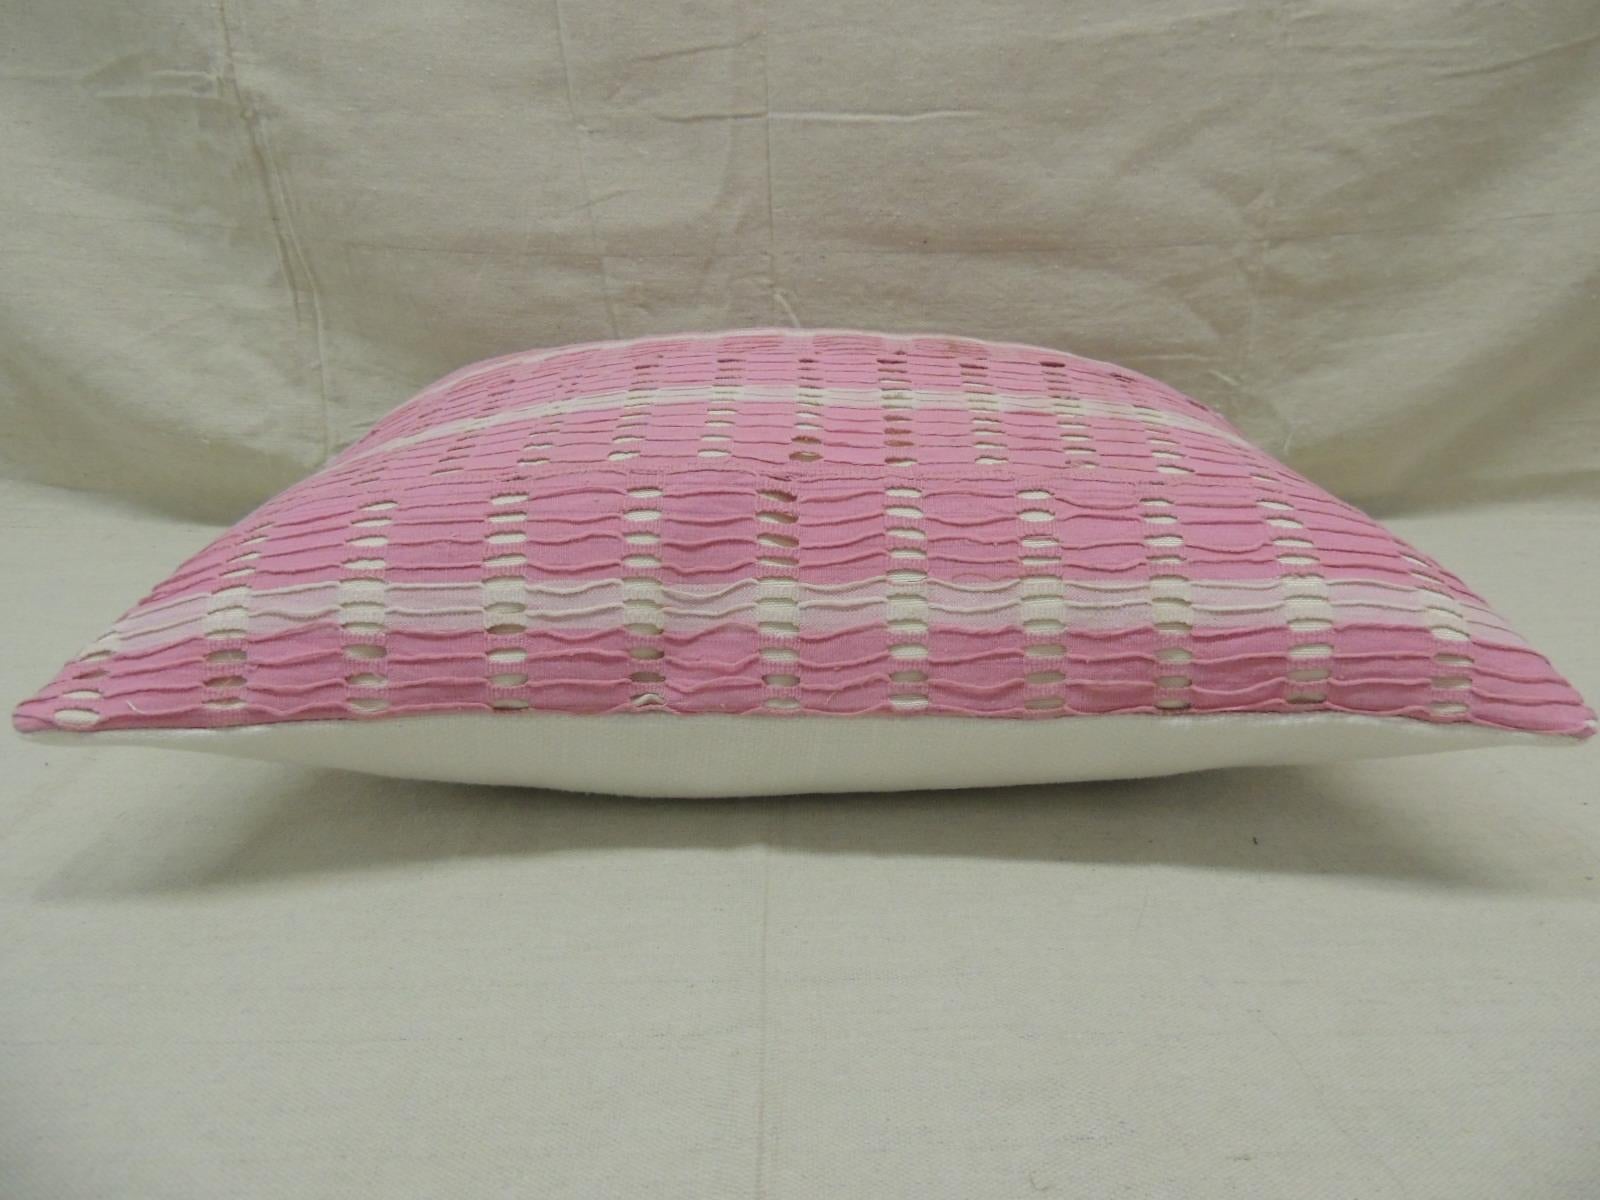 Hand-Crafted Vintage Yoruba Lace Weave Hot Pink African Bolster Decorative Pillow